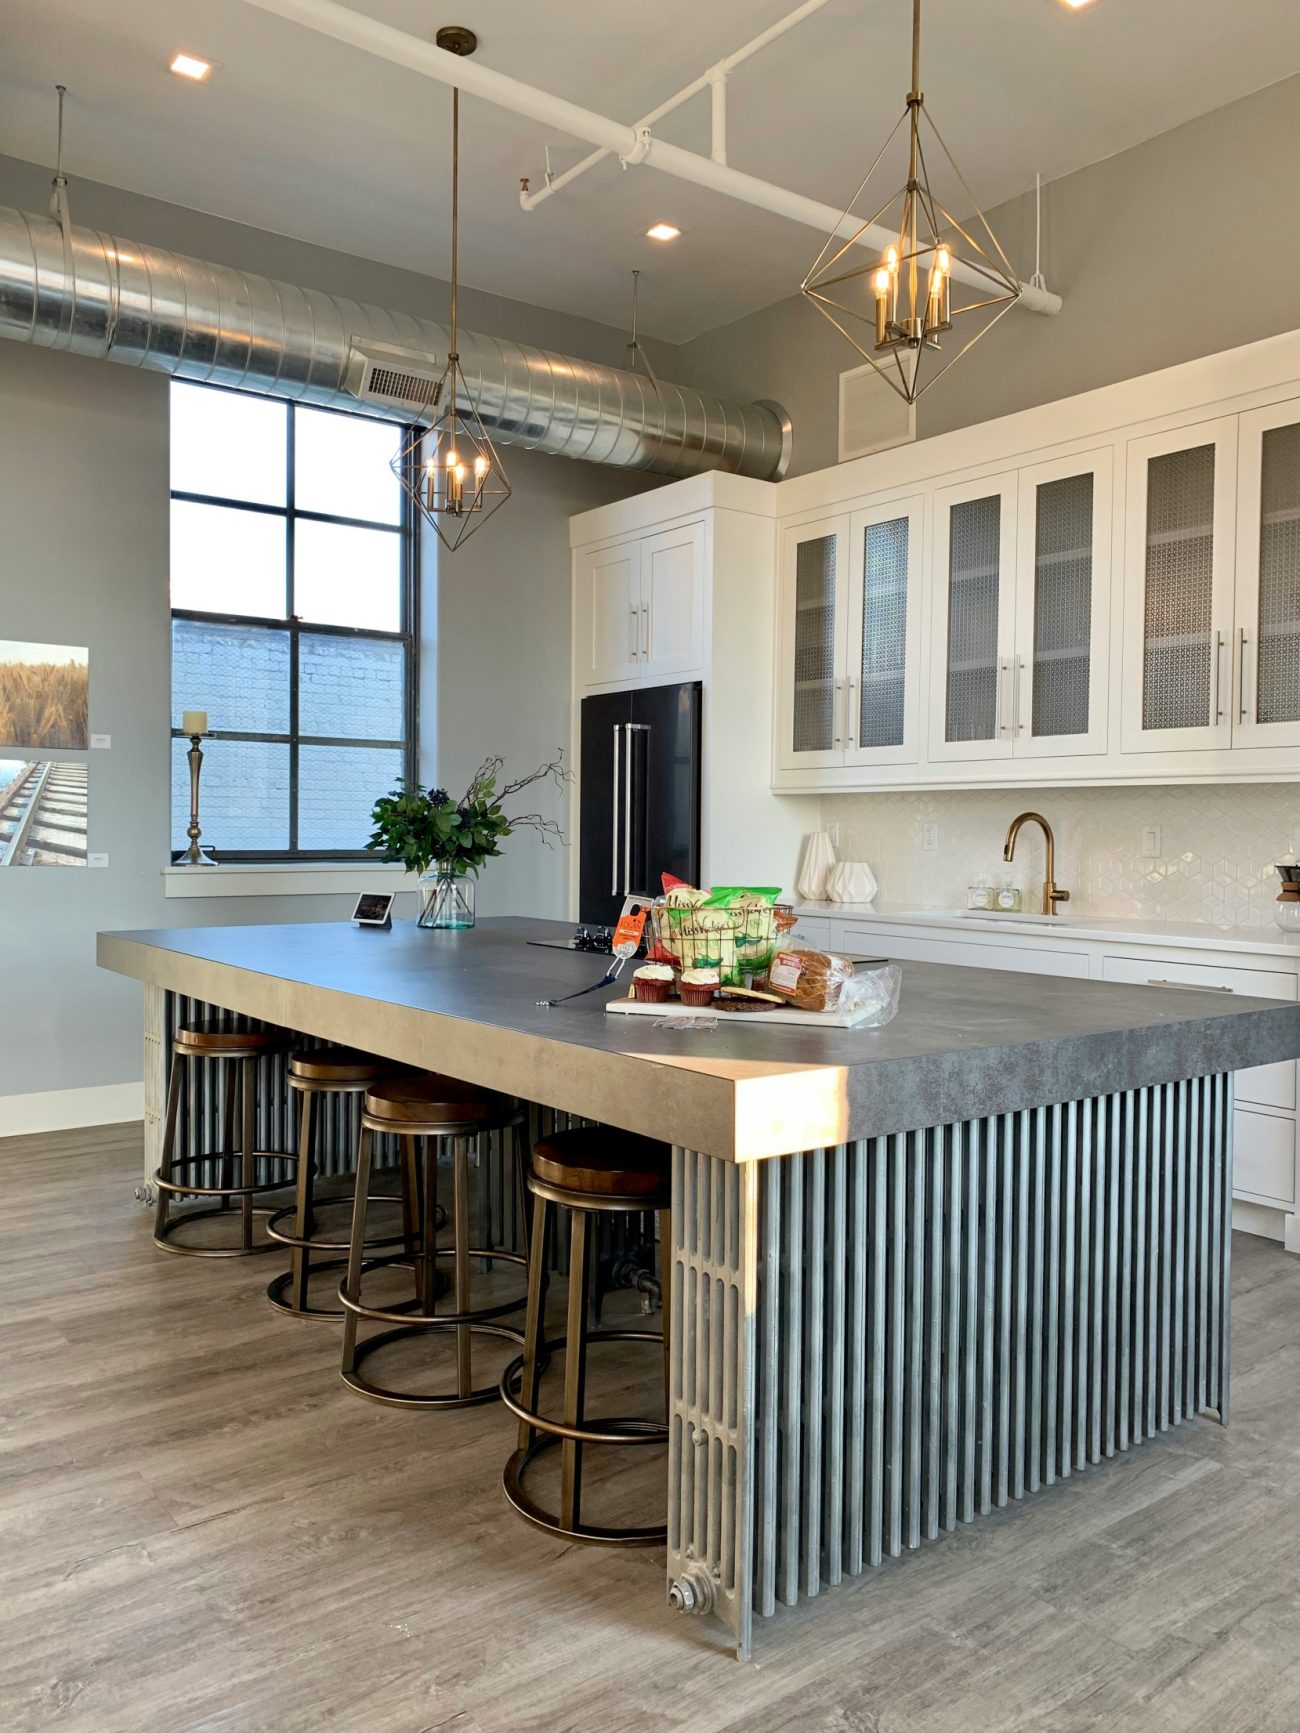 Central kitchen island with four stools